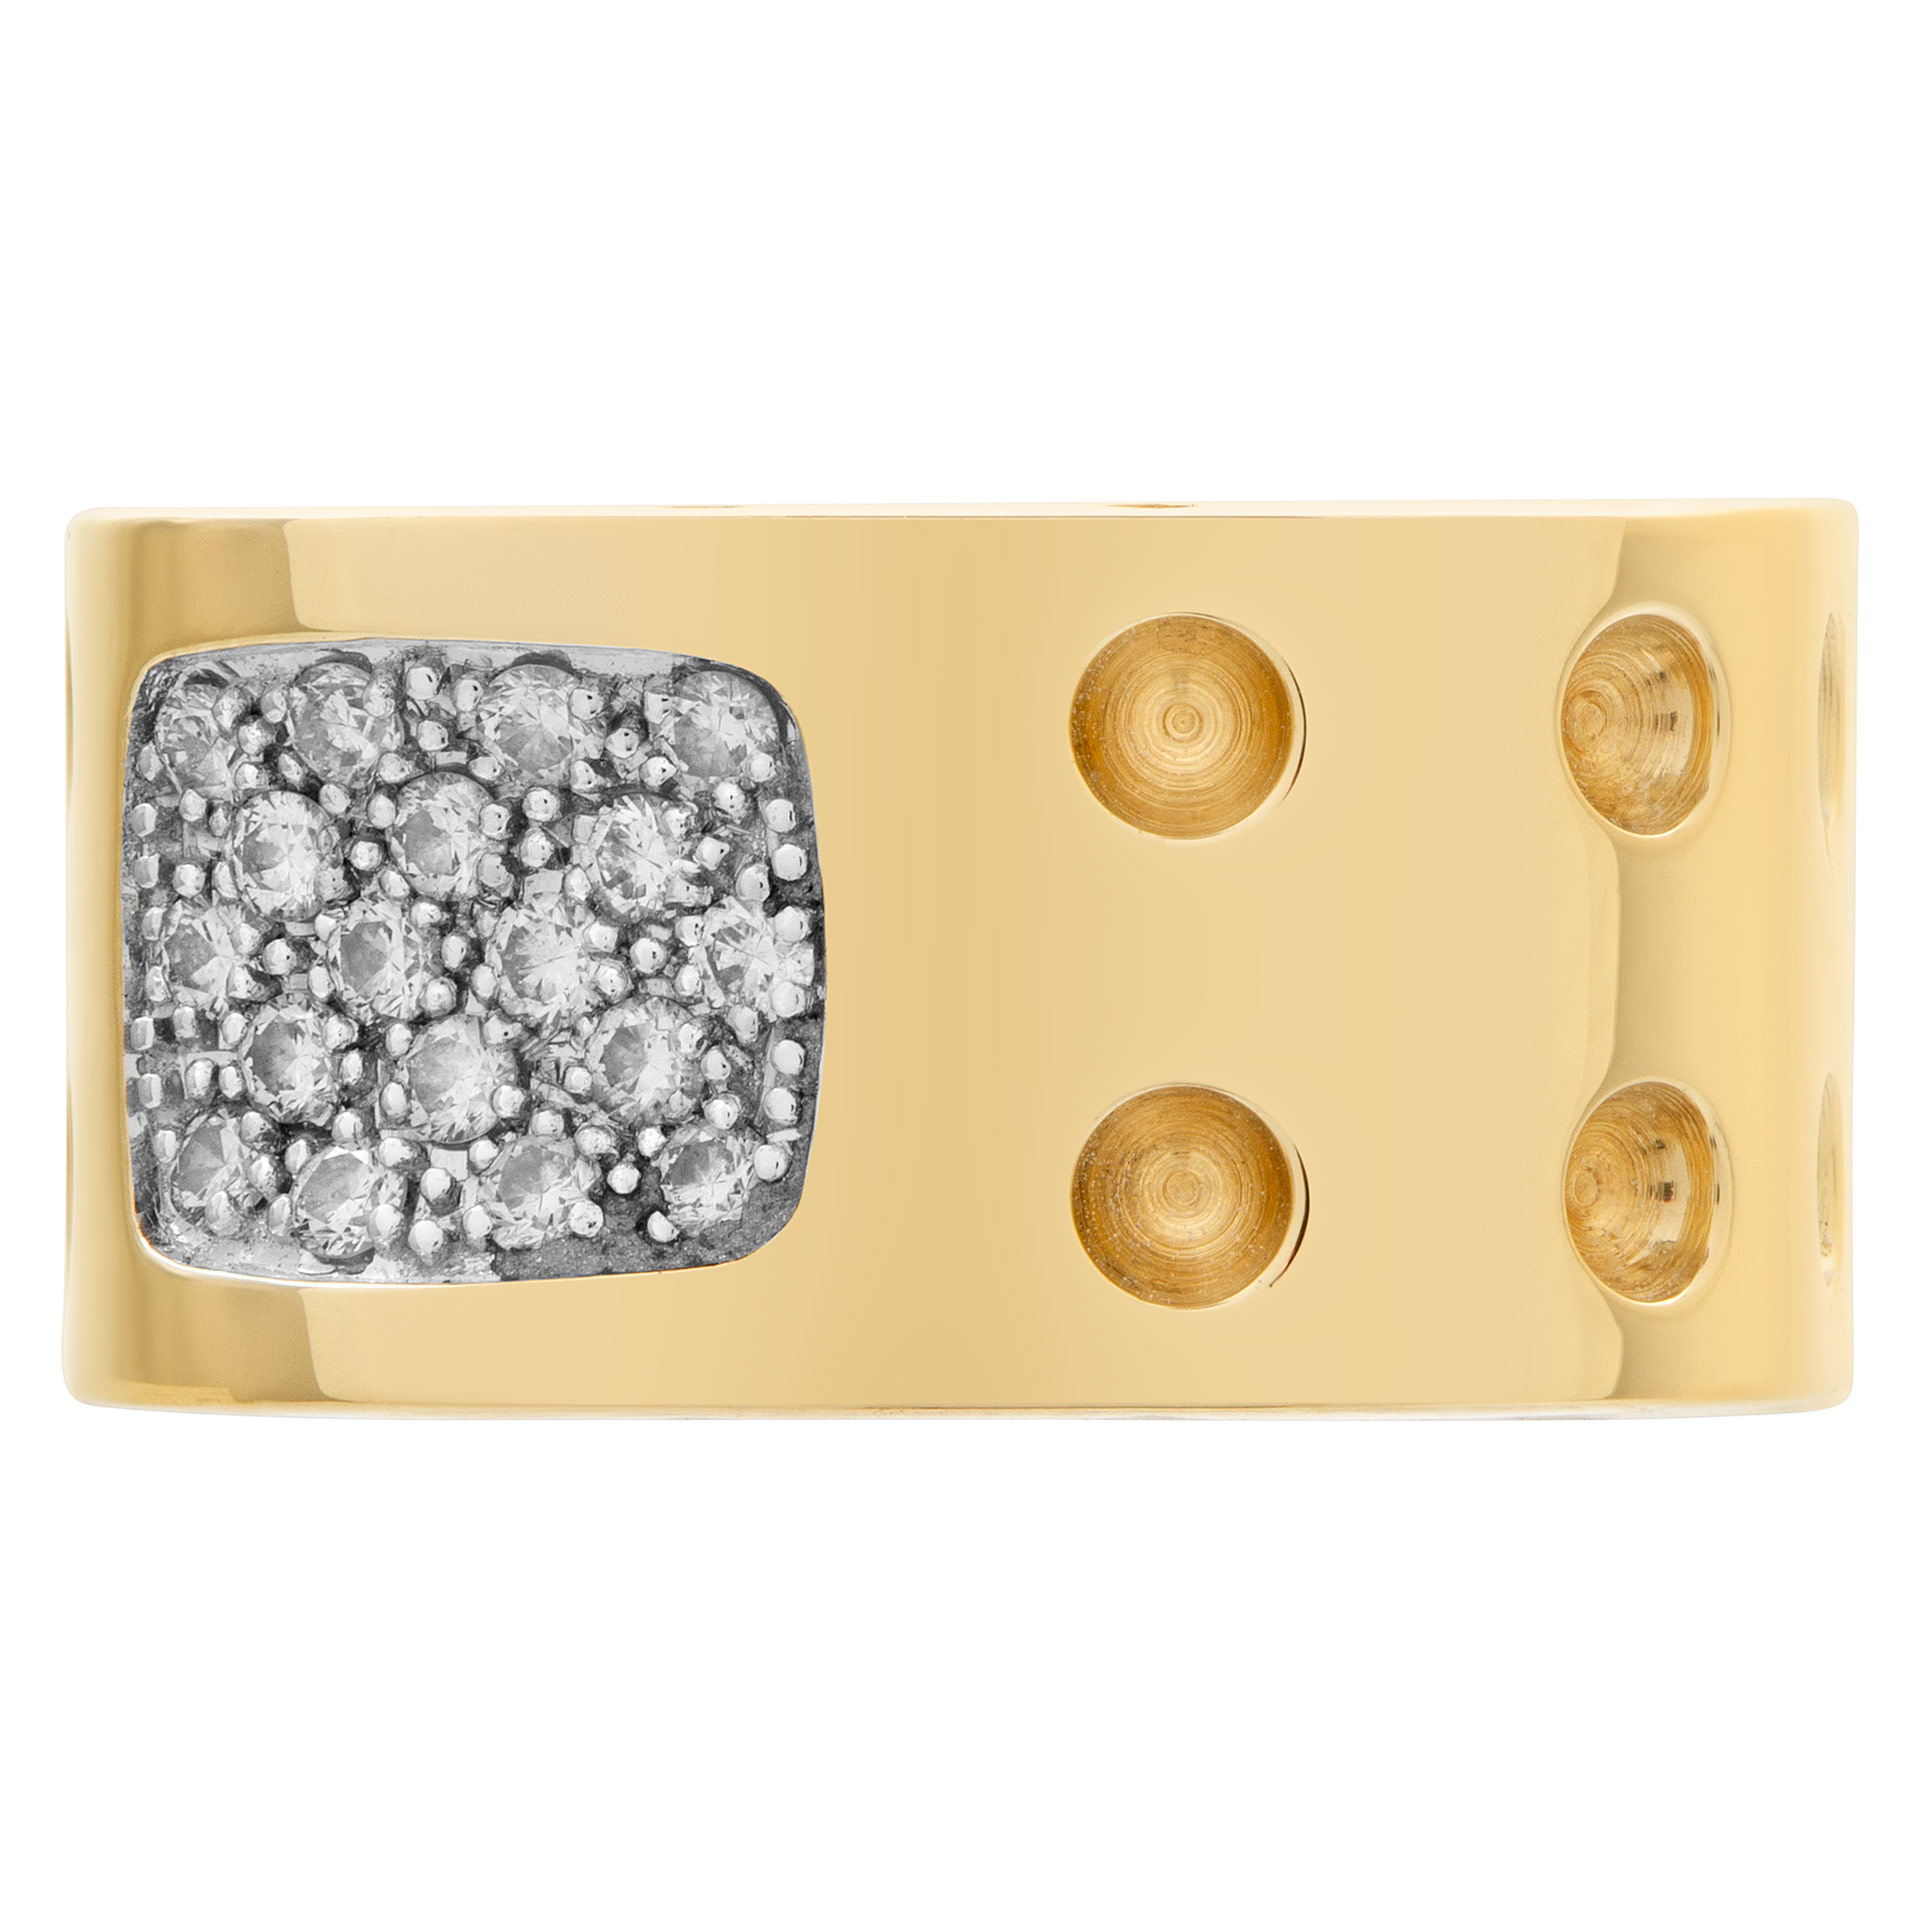 Roberto Coin Pois Moi two-row ring in 18k with diamonds